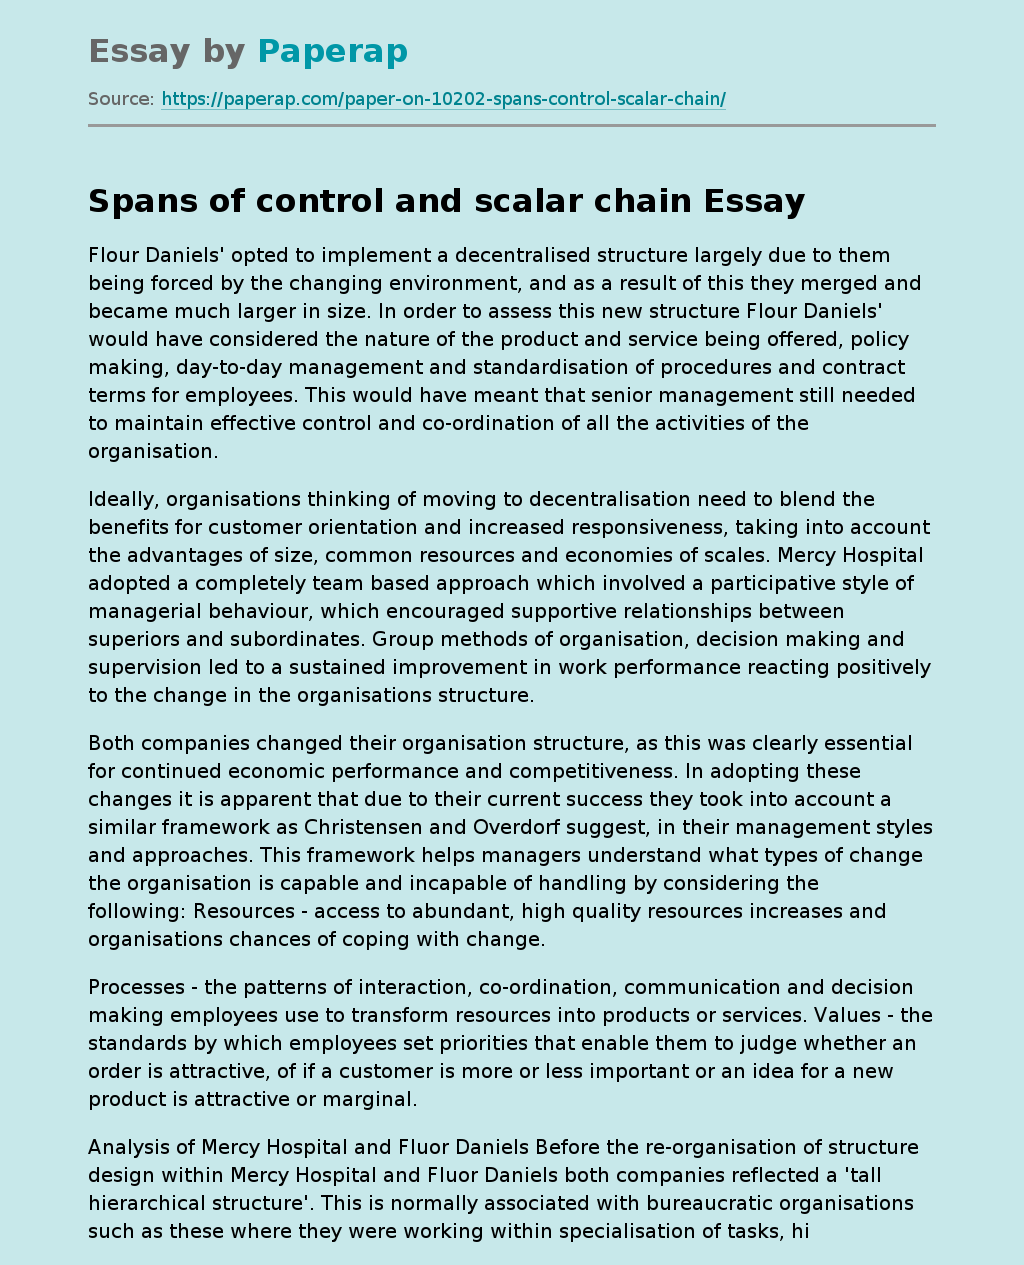 Spans of Control and Scalar Chain